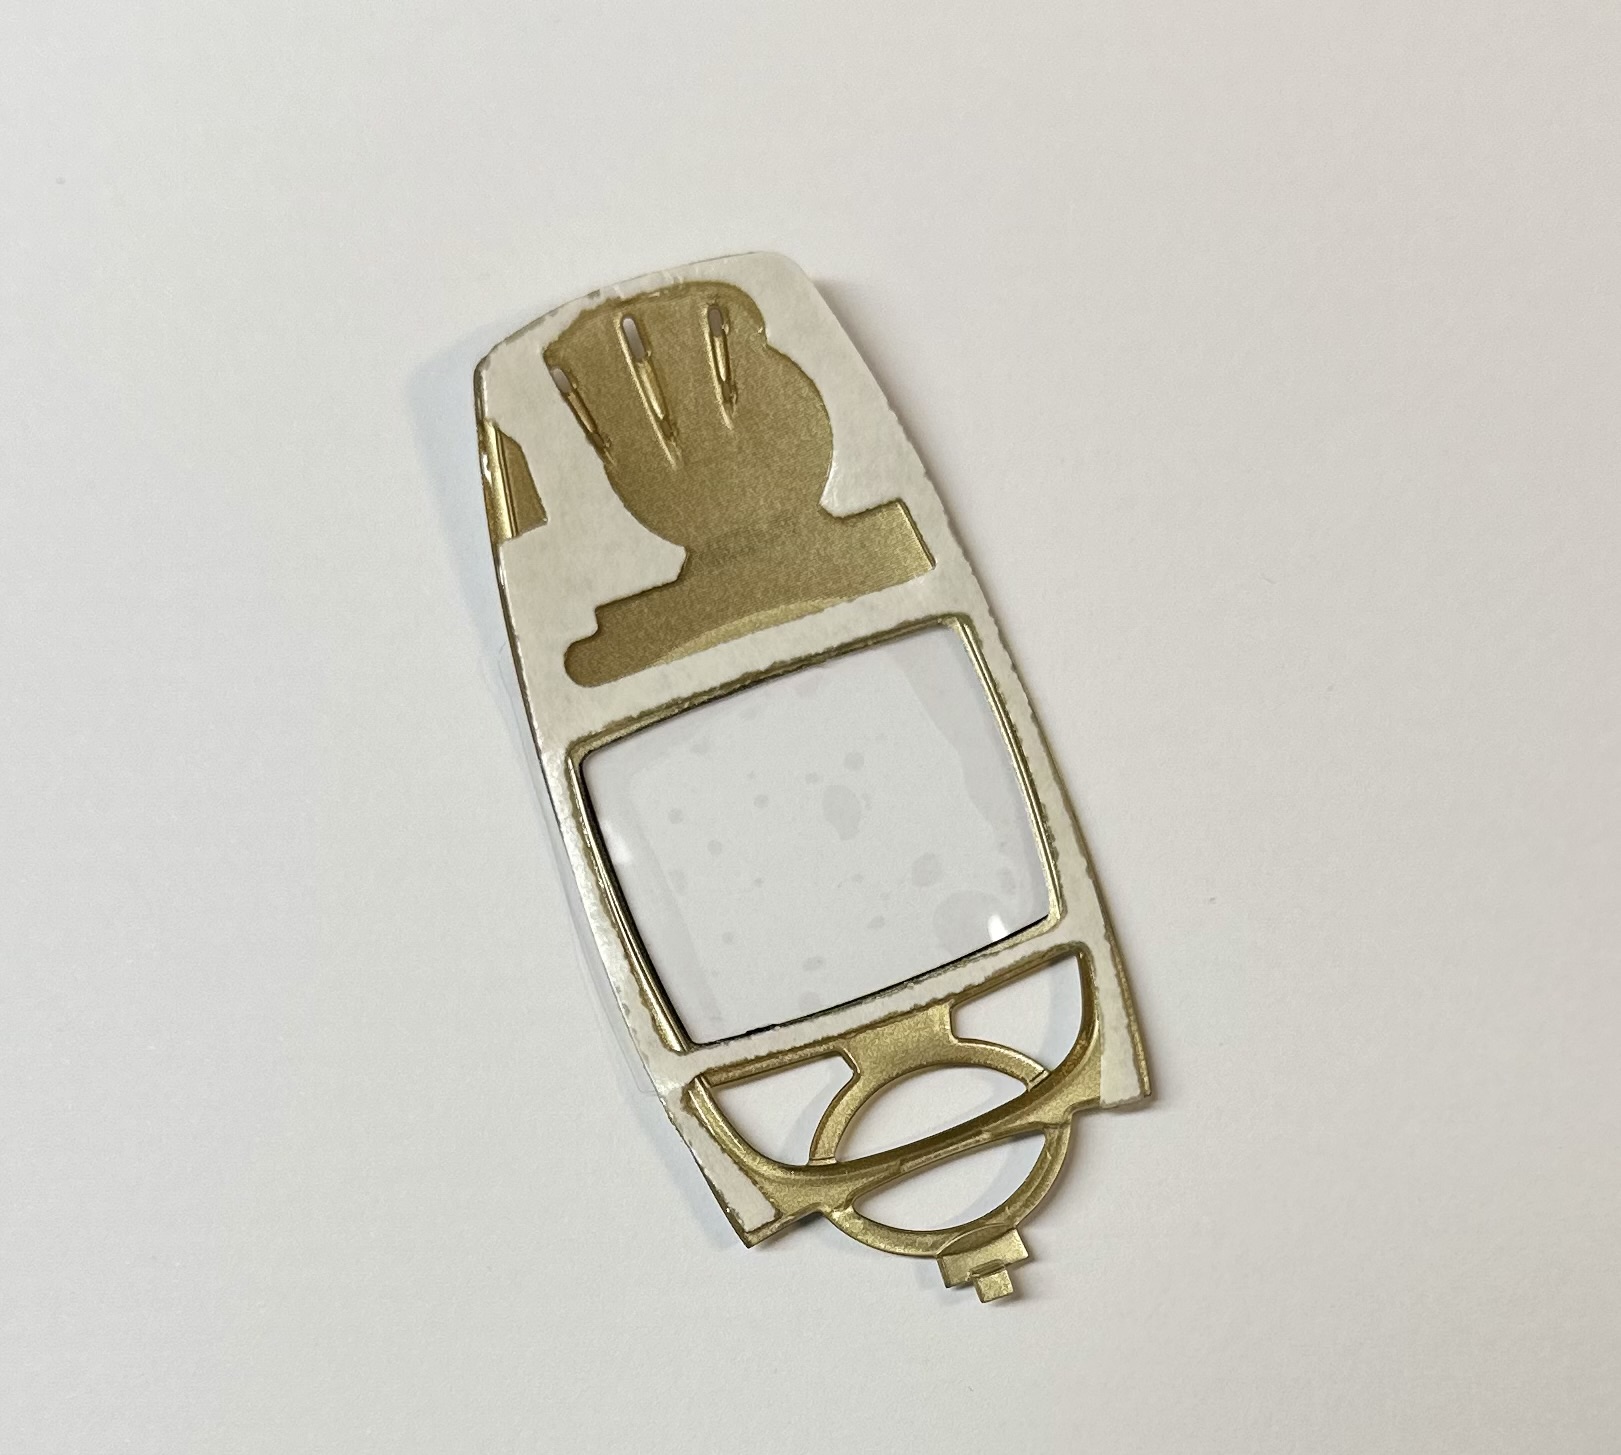 Nokia 6310 6310i Displayglas Display Glass Window Top Cover Gold